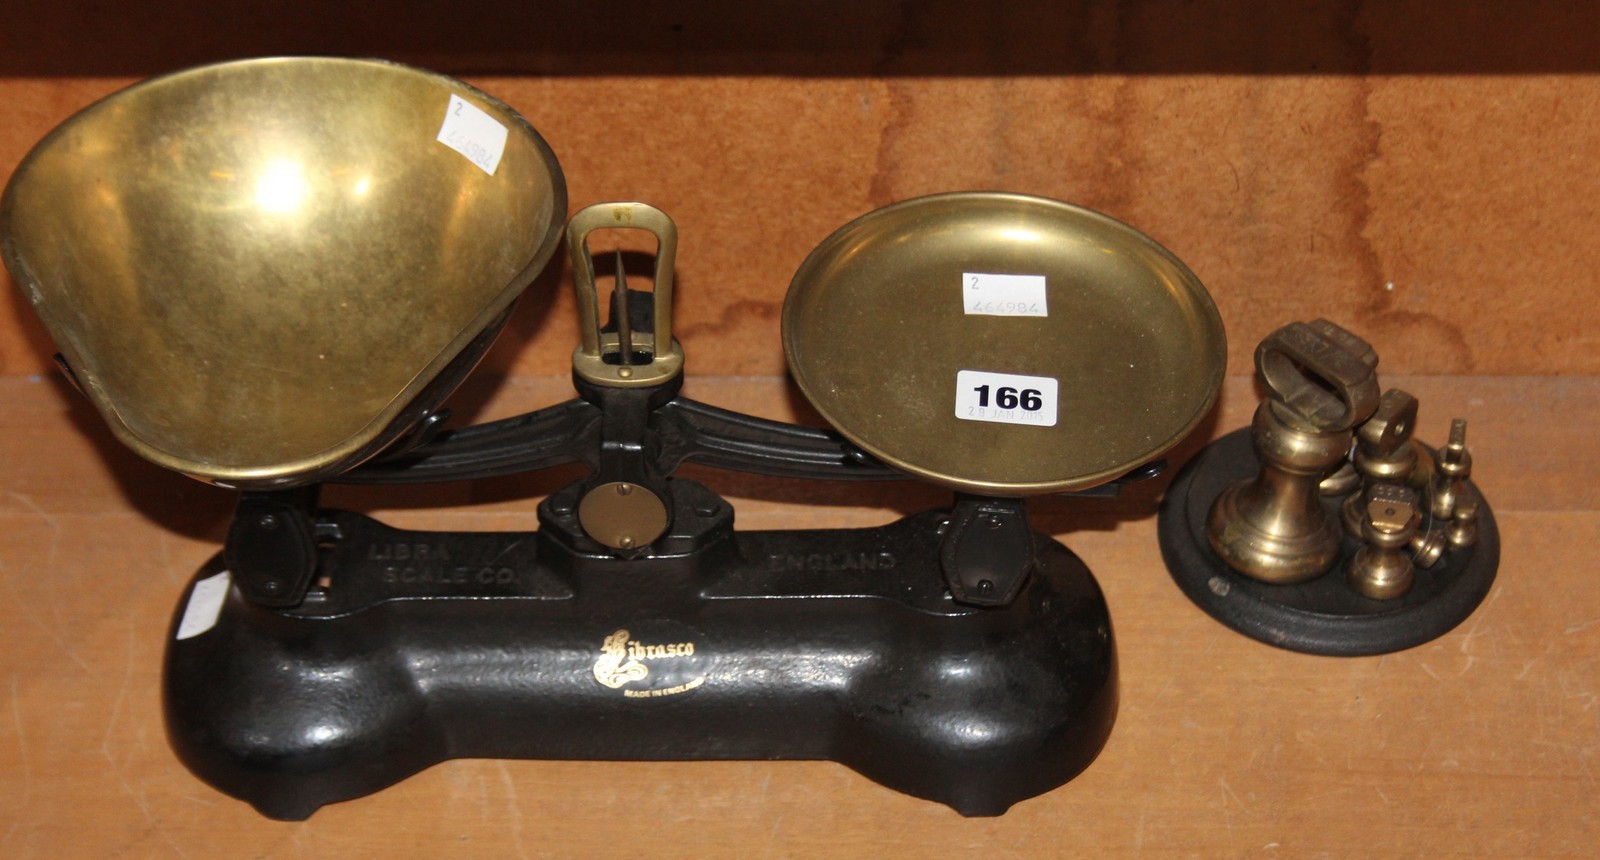 Librasco weighing Scales and weights